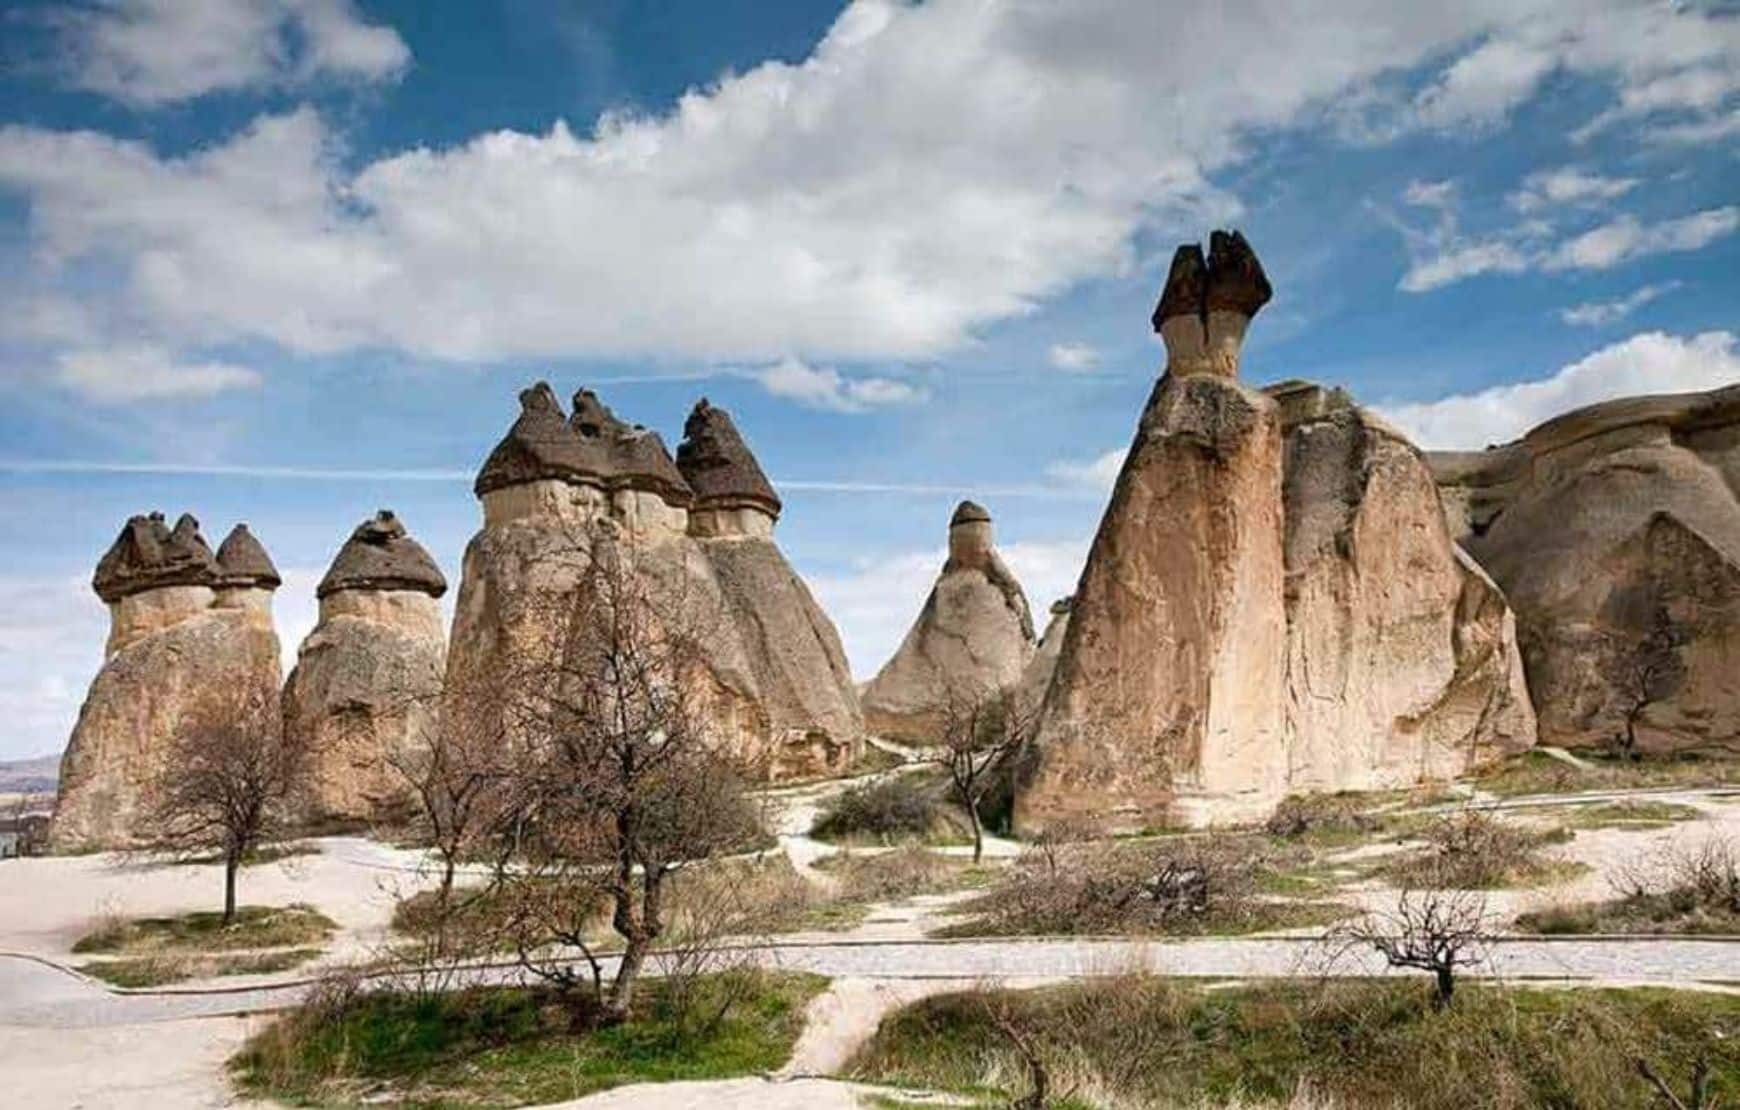 Visit Goreme Open Air Museum with our Cappadocia Tour from Istanbul